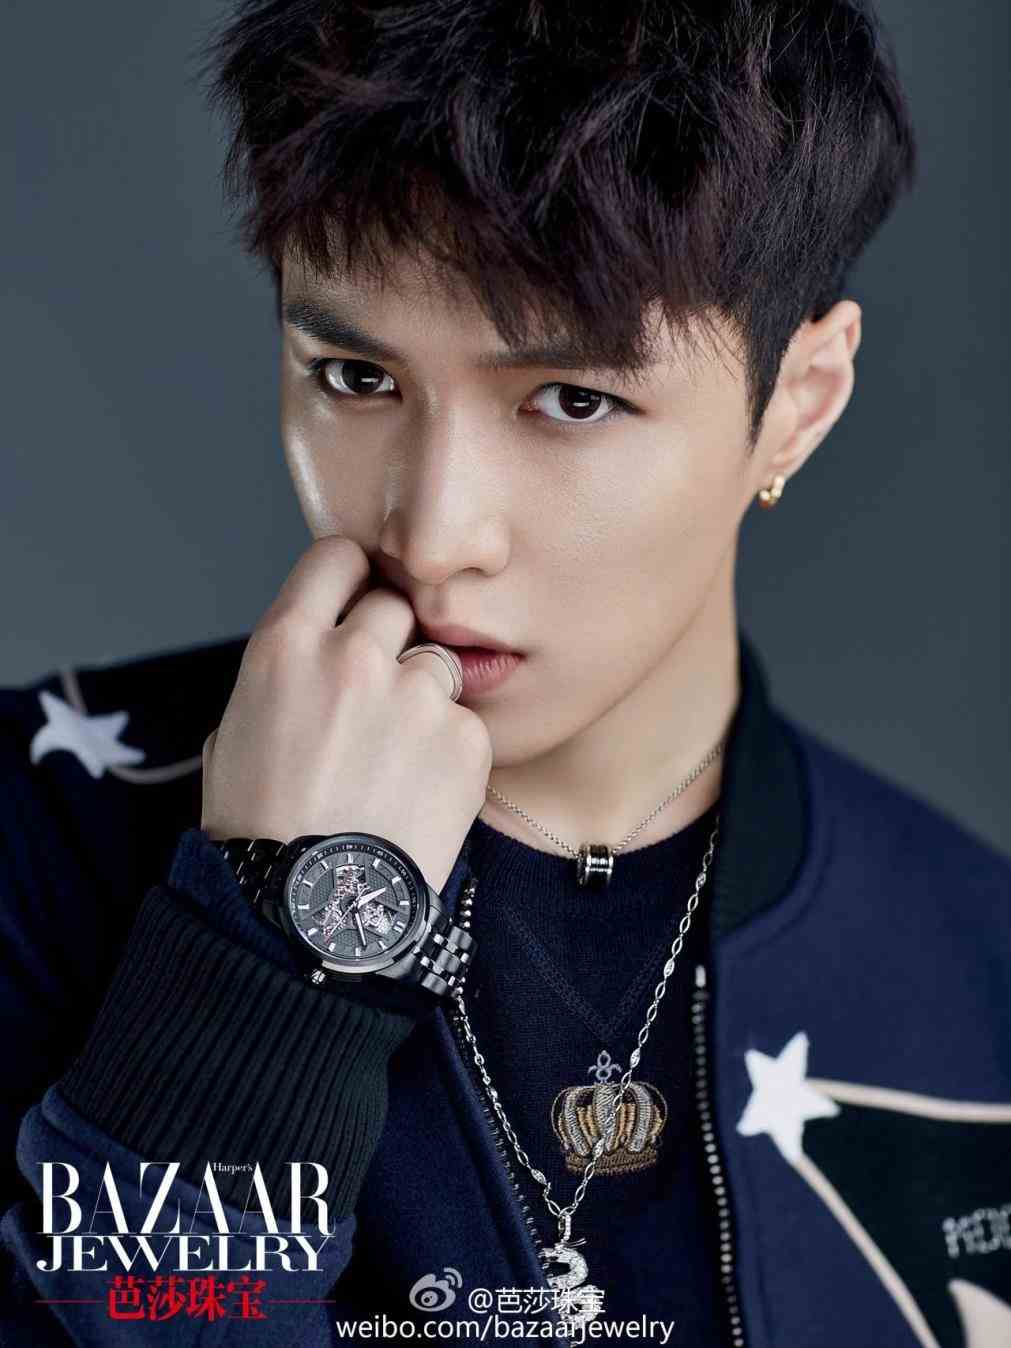 Exo Lay Wallpaper (Picture)